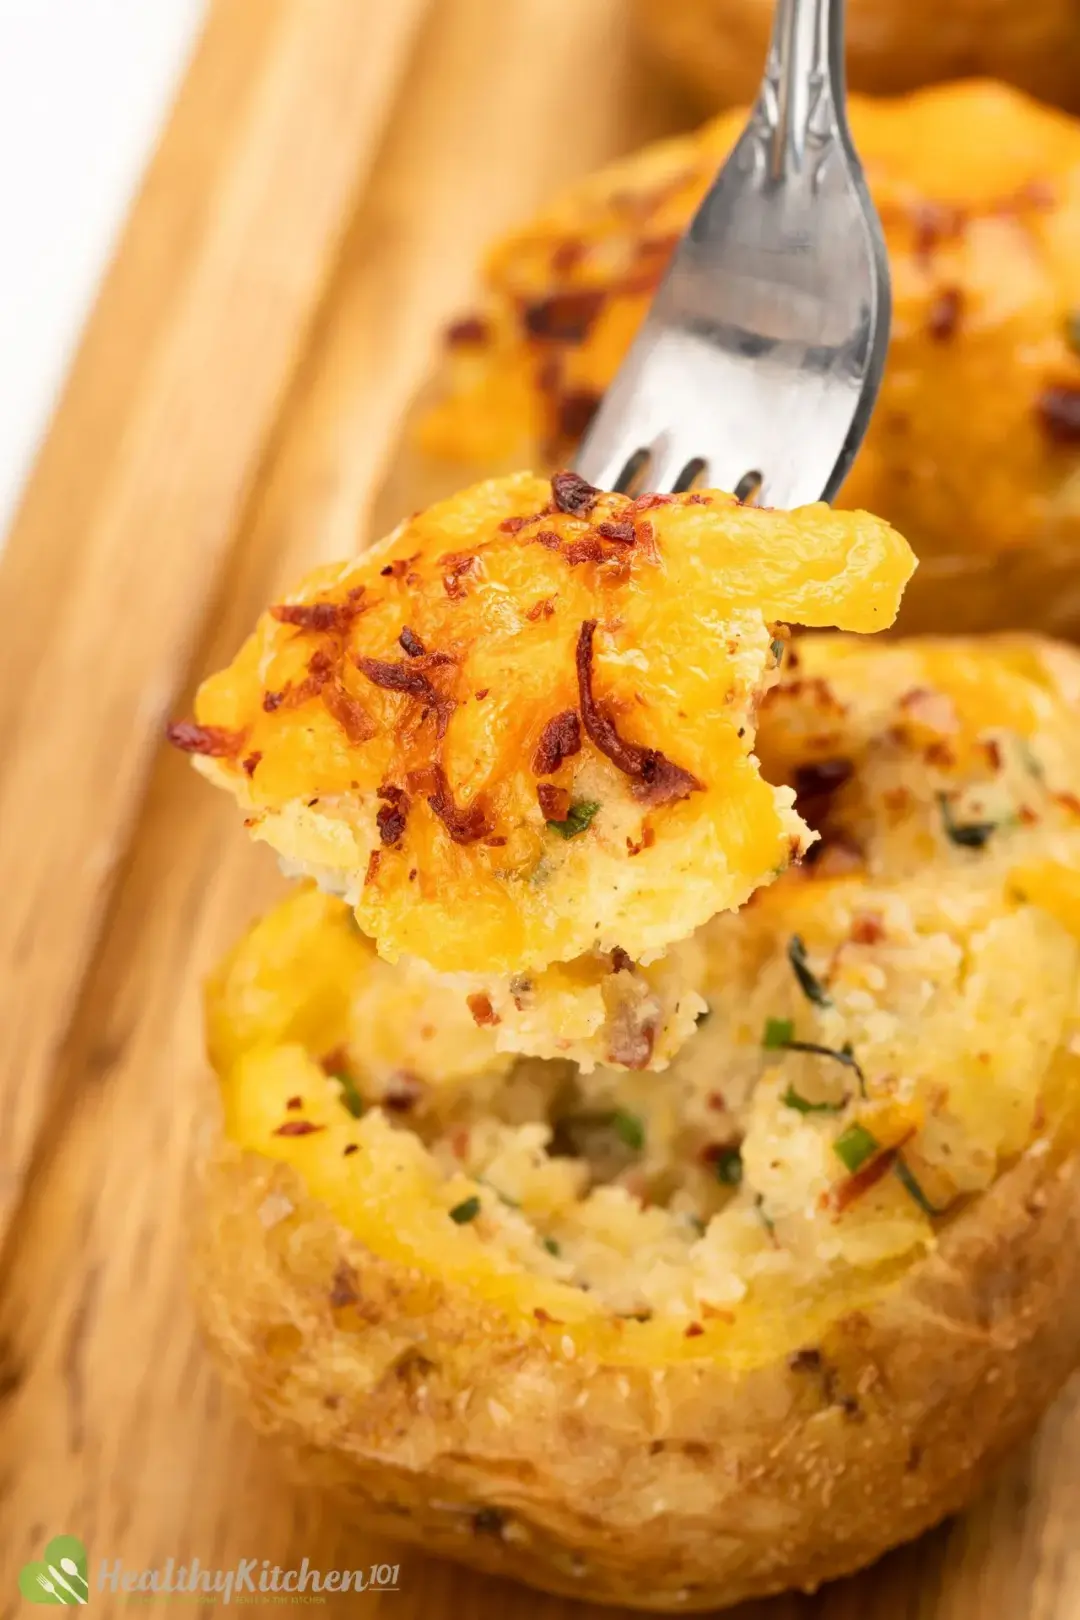 Are Baked Potatoes Healthy